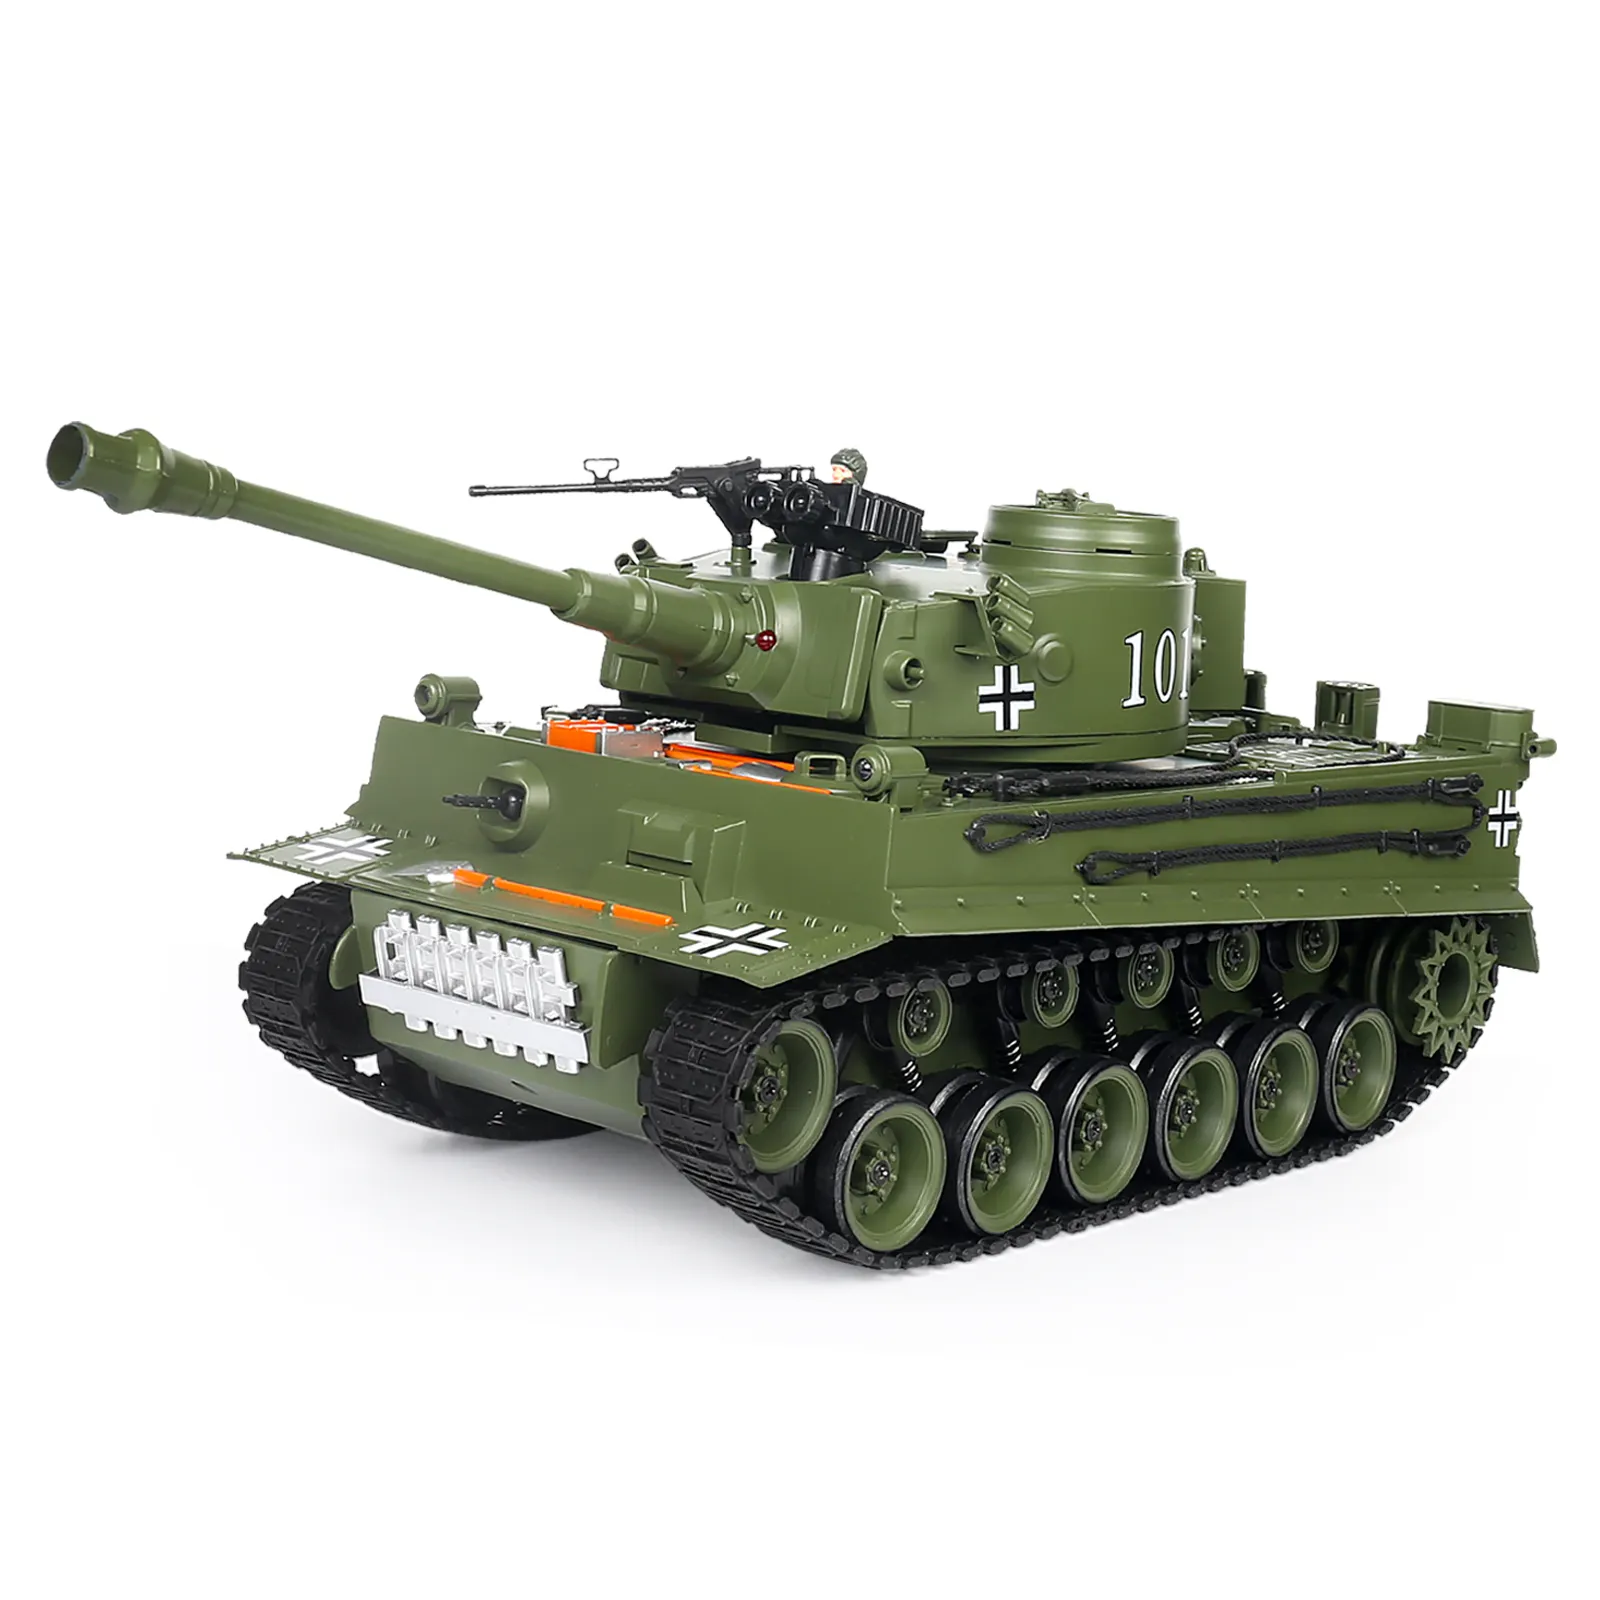 2.4G Military Remote Control Battle Tank 1/20 Scale Battery Operated RC Shooting Tank for Kids